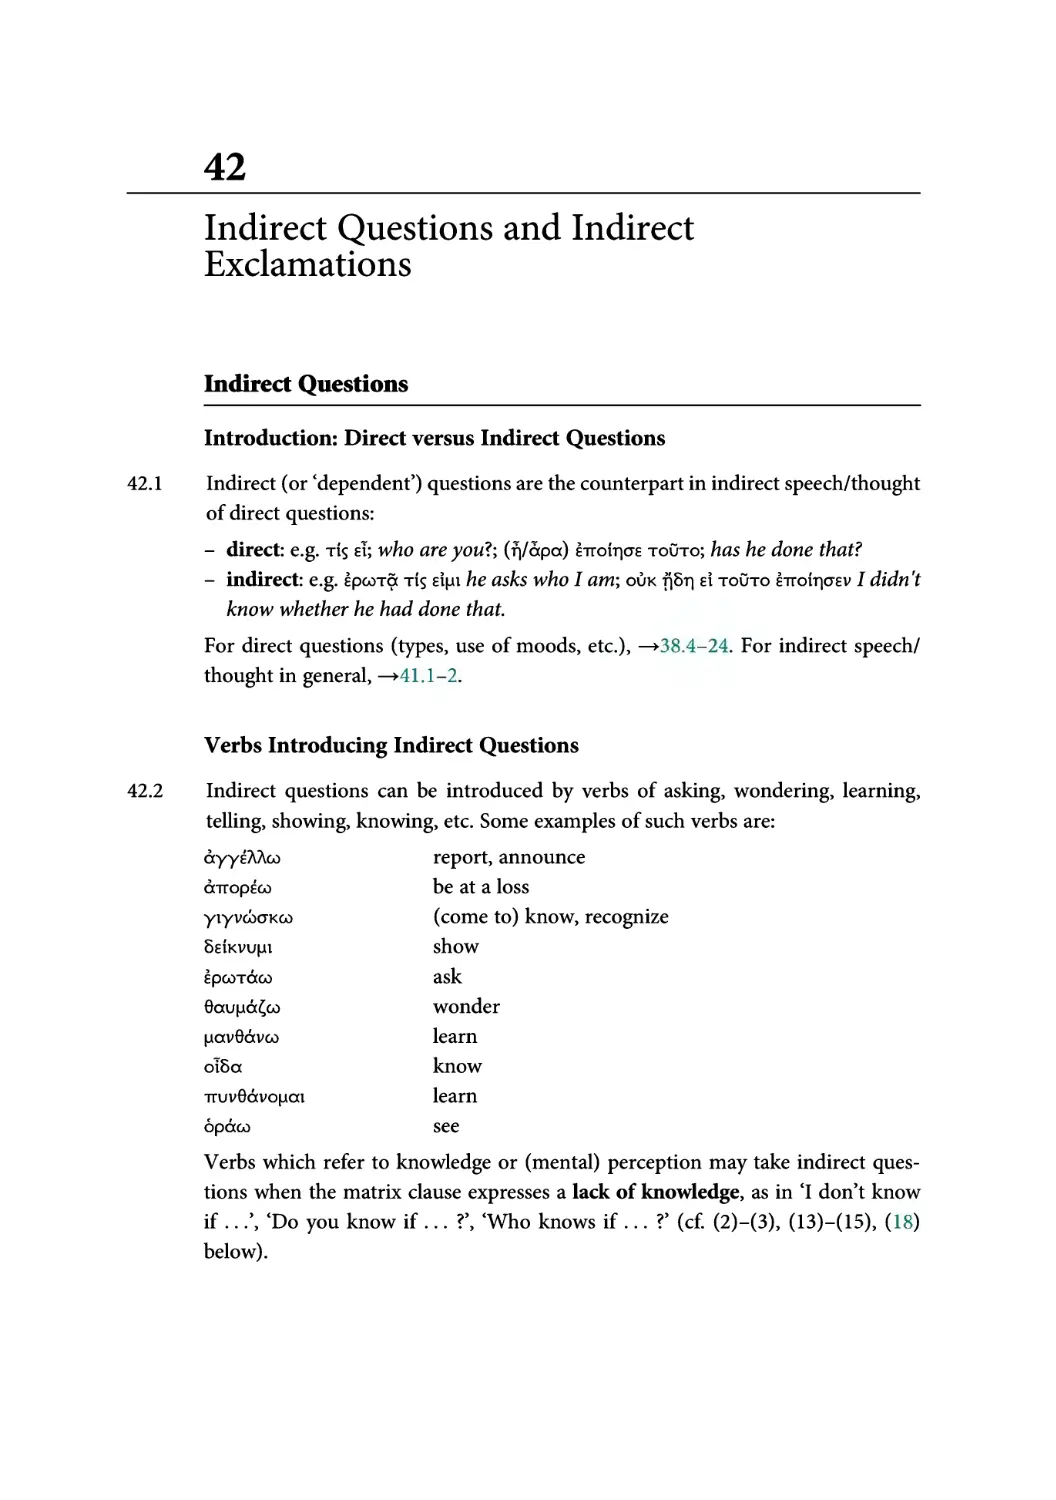 42. Indirect Questions and Indirect Exclamations